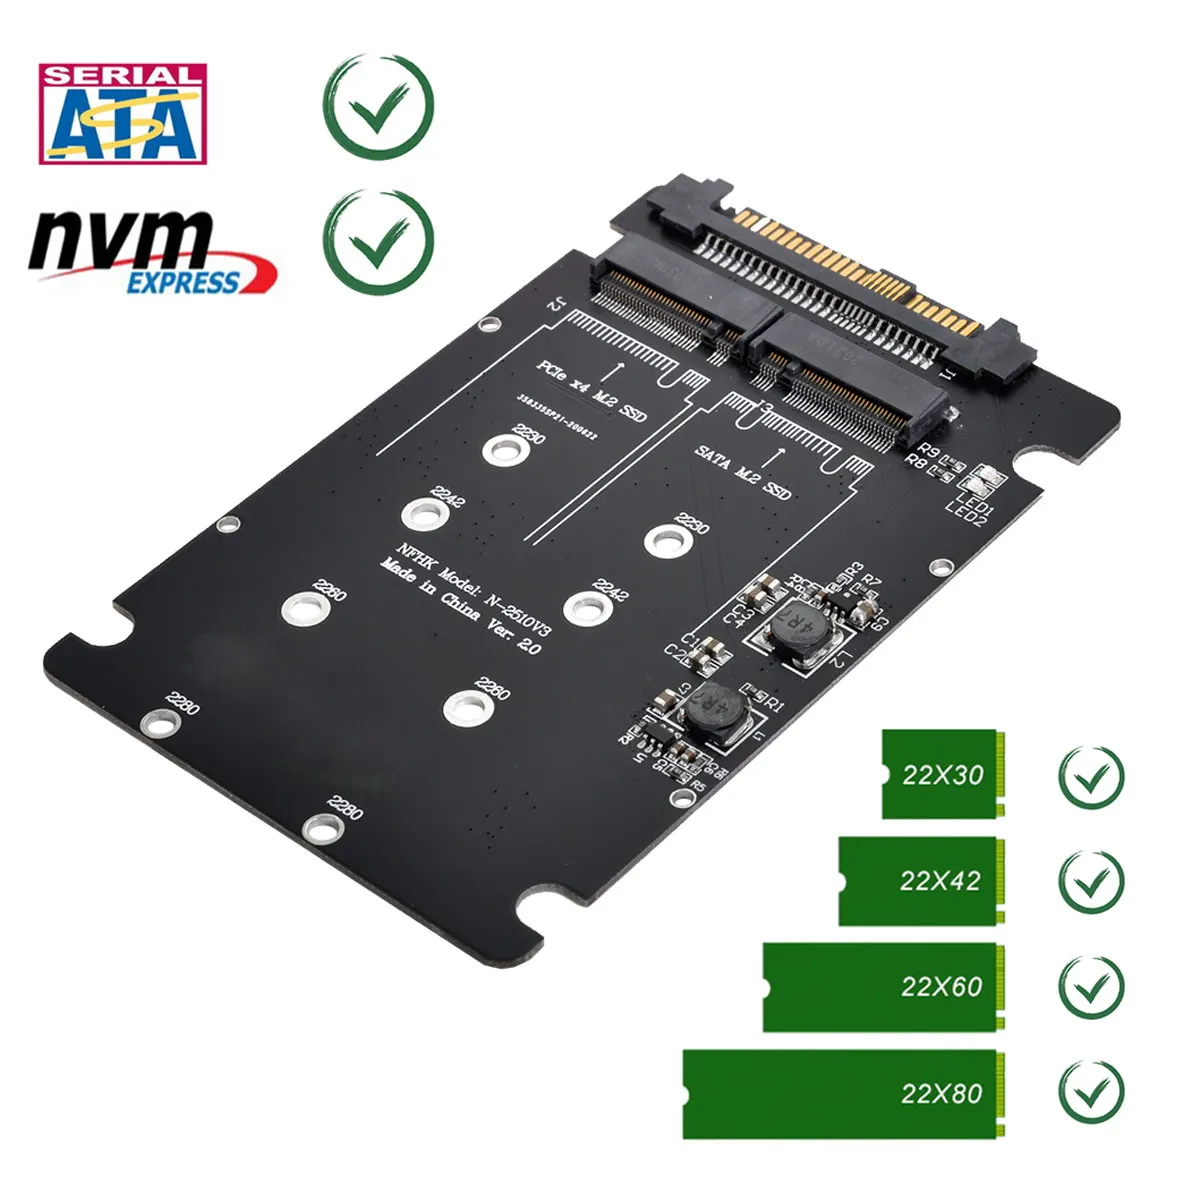 

CYSM Chenyang SFF-8639 NVME U.2 to Combo NGFF M.2 M-key SATA PCIe SSD Adapter for Mainboard Replace SSD 750 p3600 p3700